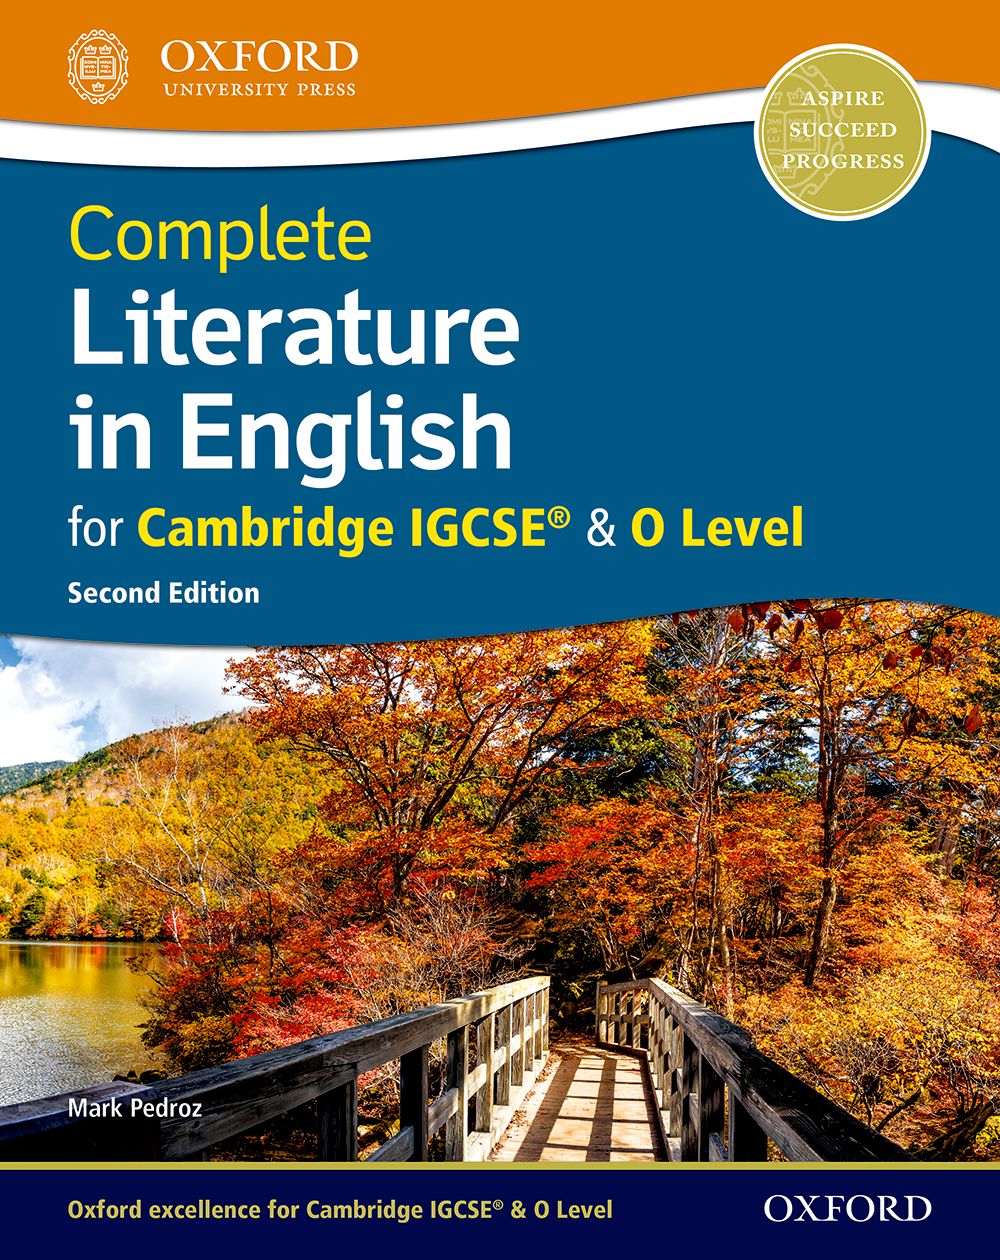 Featured image for “Complete Literature in English for Cambridge IGCSE® & O Level”